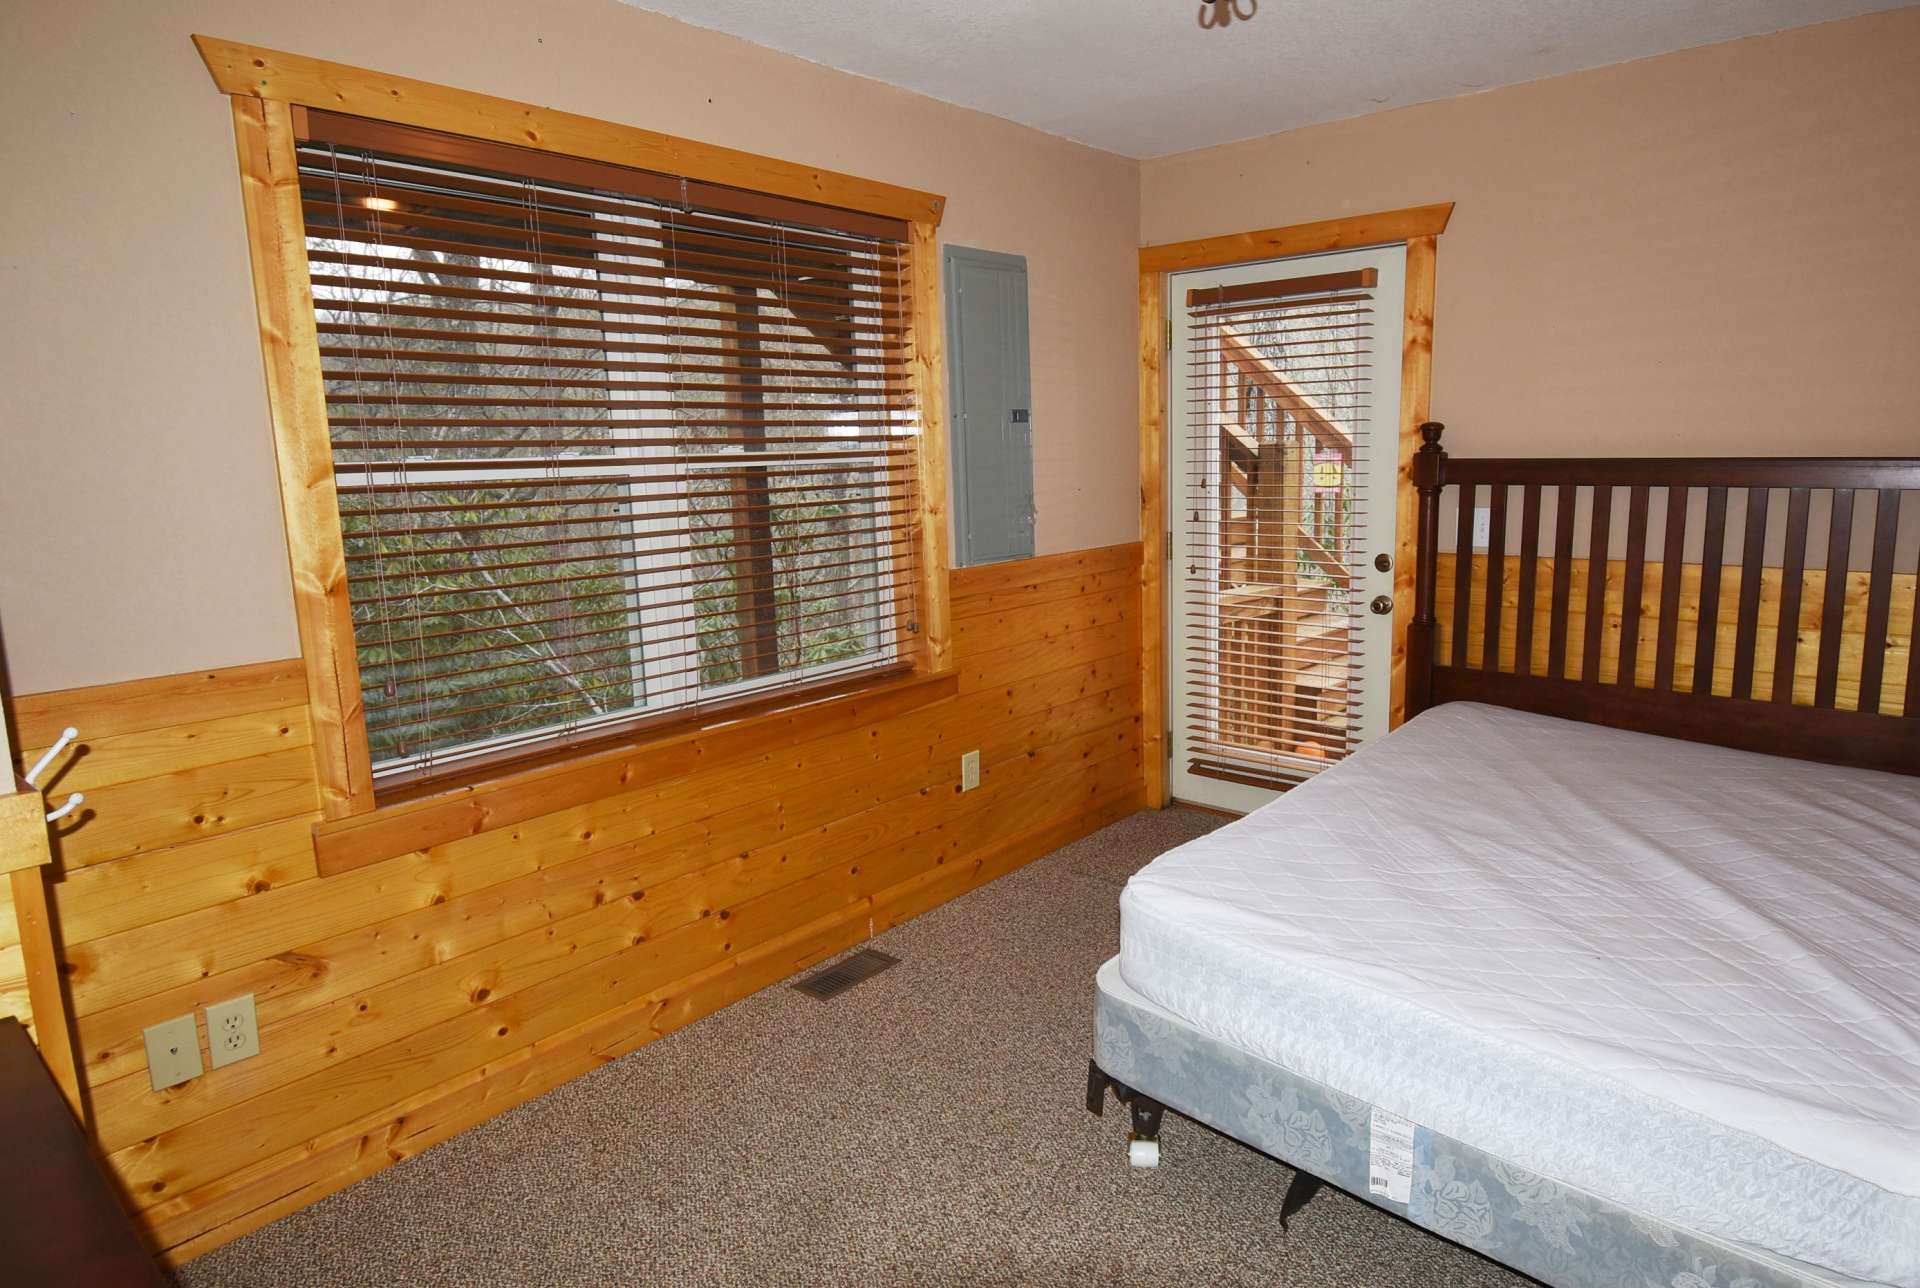 The full finished walk out lower level offers a play room or media room, bedroom, full bath and laundry area.